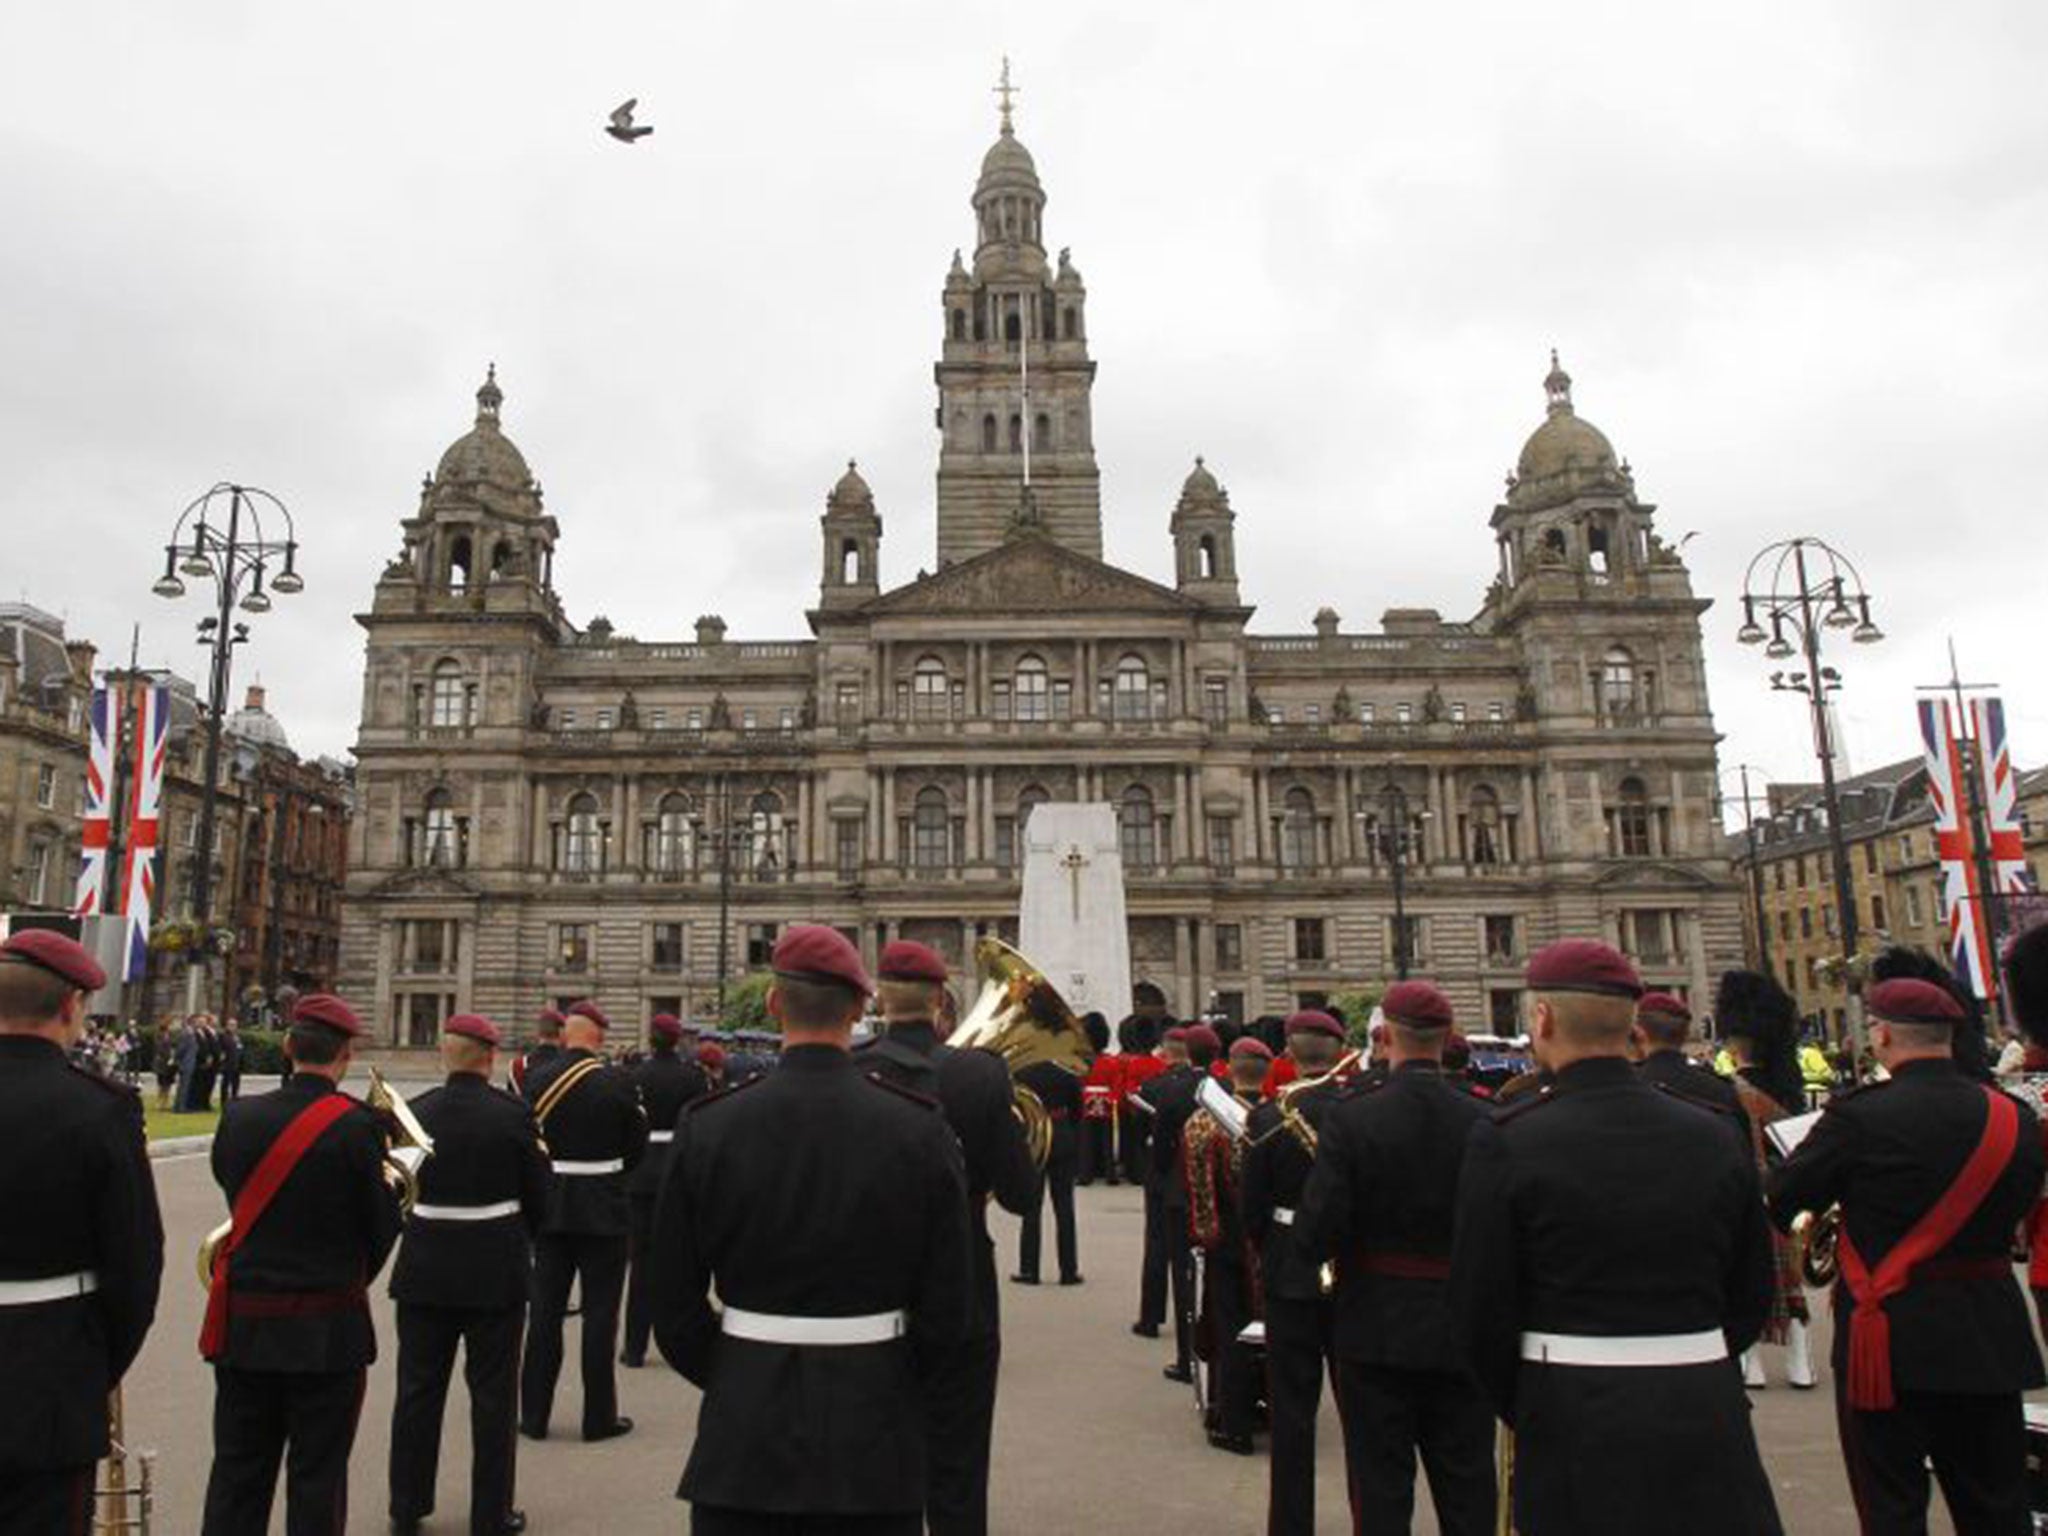 The band of the Parachute Regiment preparing to play in George Square